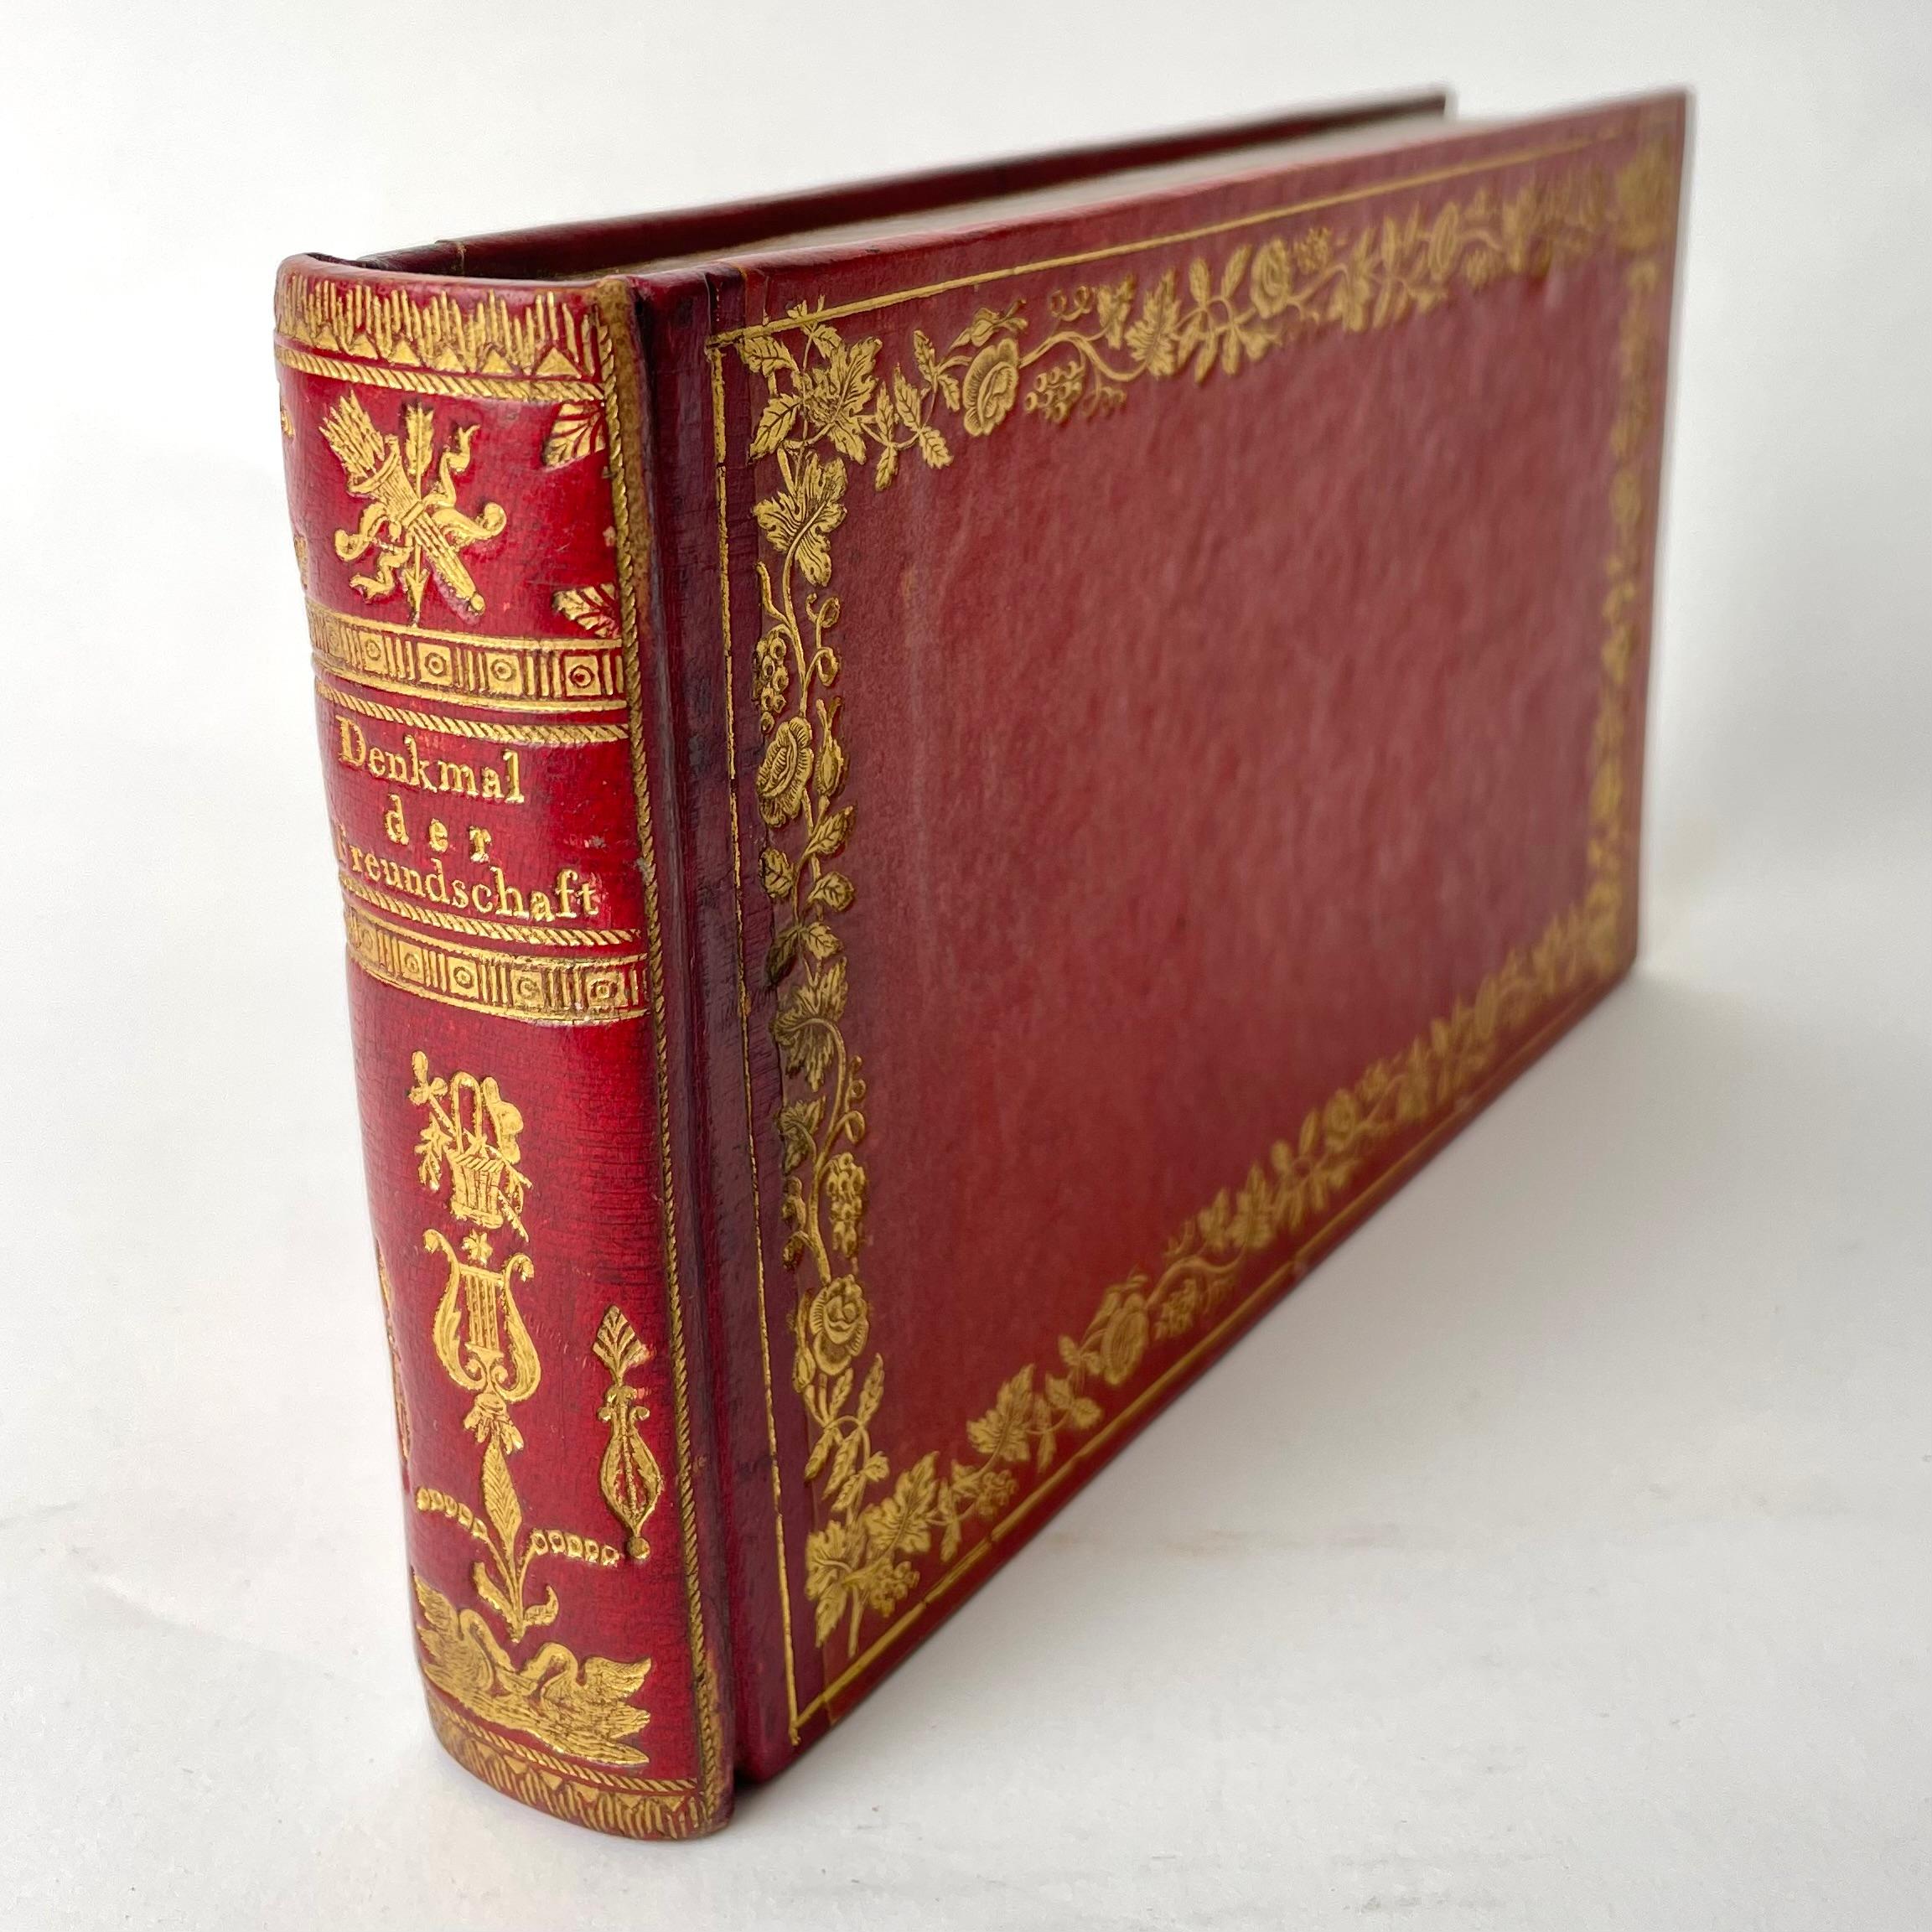 Swedish Love letter pocket in the shape of a book from the Empire period 1820s. Made by bookbinder A.U. Hagman, Gothenburg Sweden during the 1820s. Includes a number of letters from the 1820s.

Wear consistent with age and use 